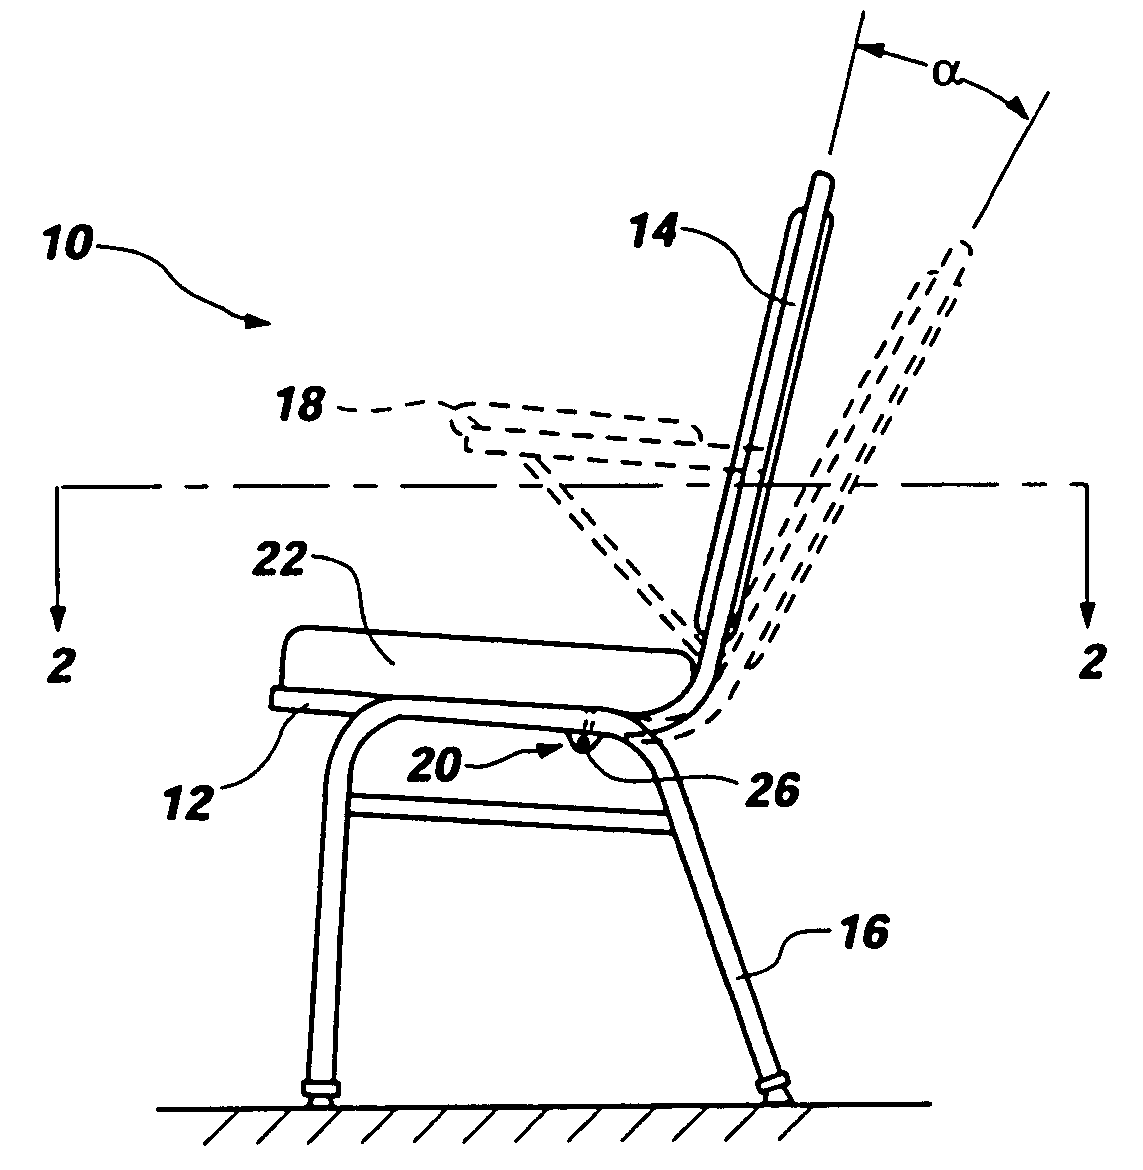 Chair with flexible, resilient back support